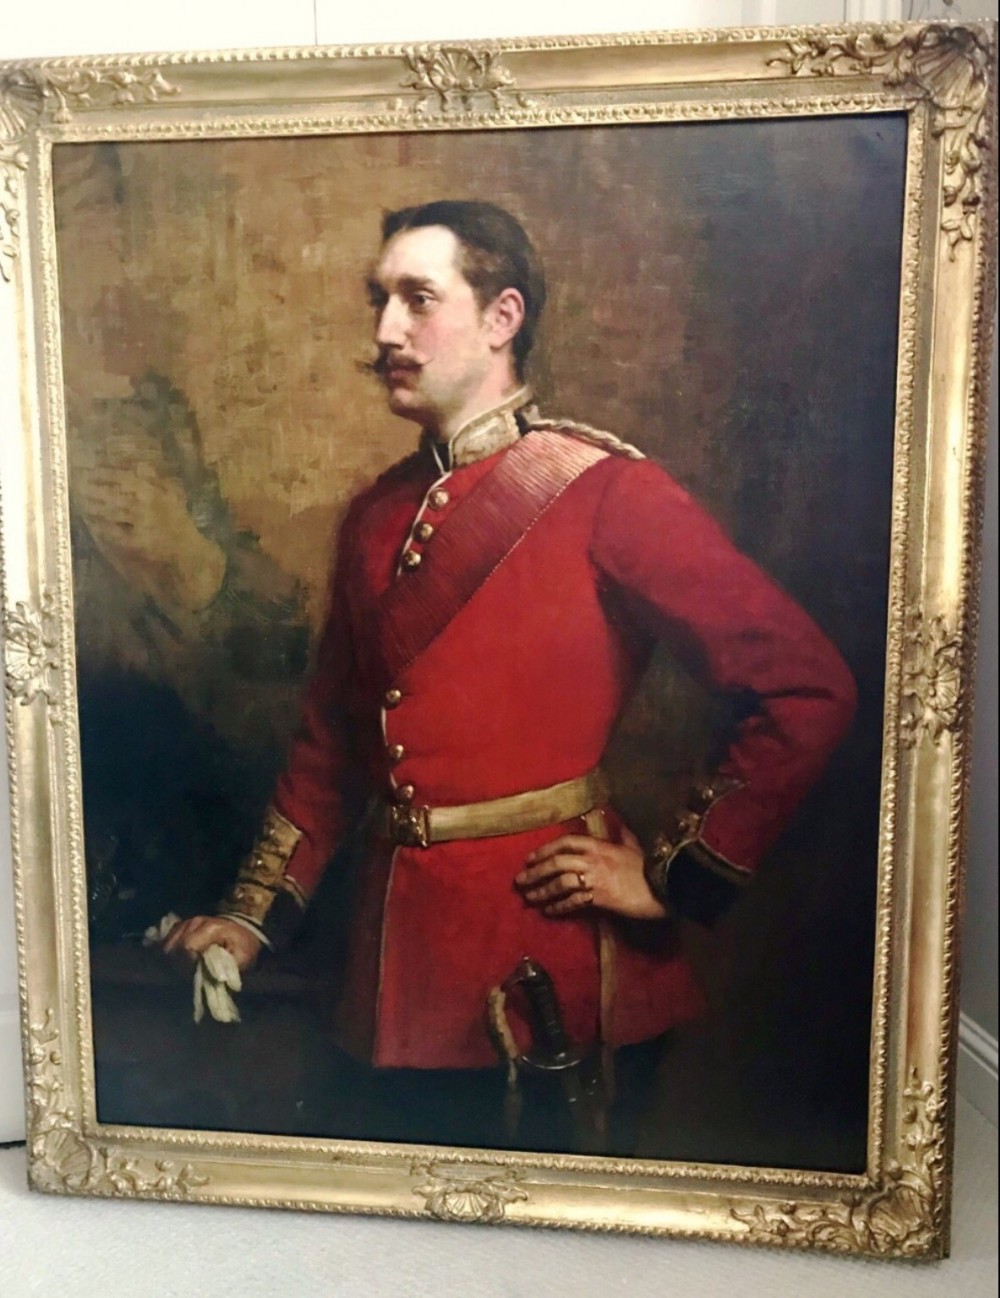 scots guards officer howard carter tutankhamen lord carnarvon oil portrait painting by brother william carter military antique art